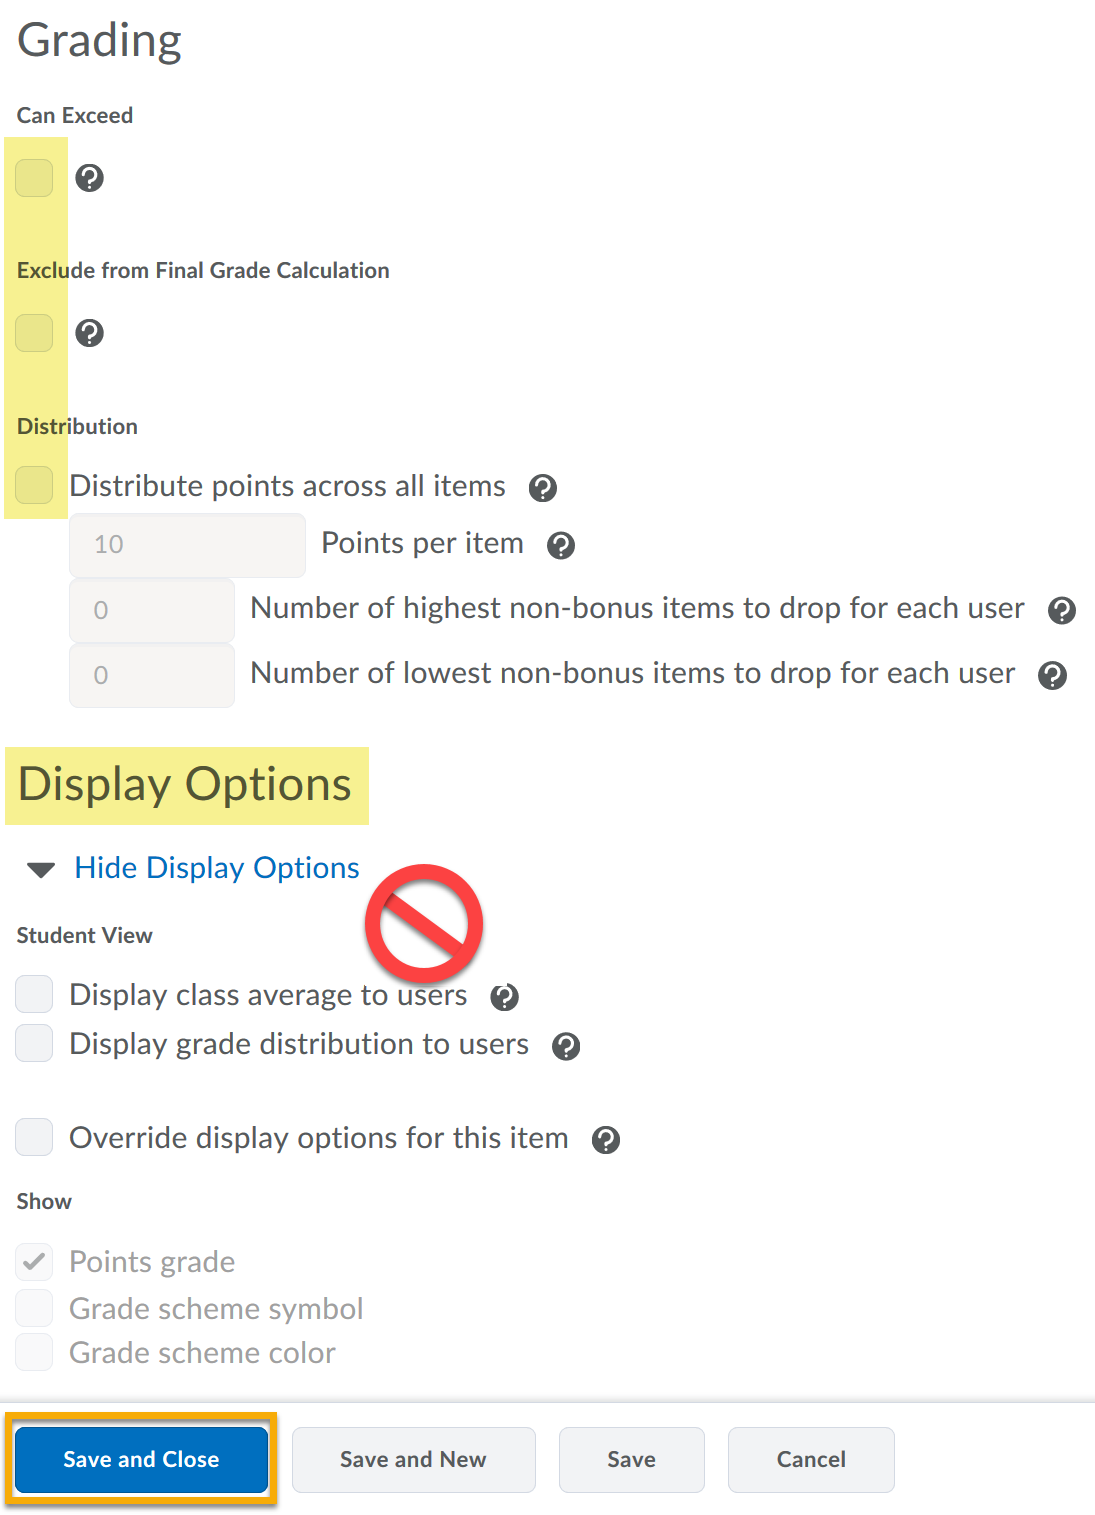 Grading checkboxes Can Exceed, Exclude from Final Grade Calculation and Distribution highlighted. Display Options highlighted with a red circle white bar don't use graphic.